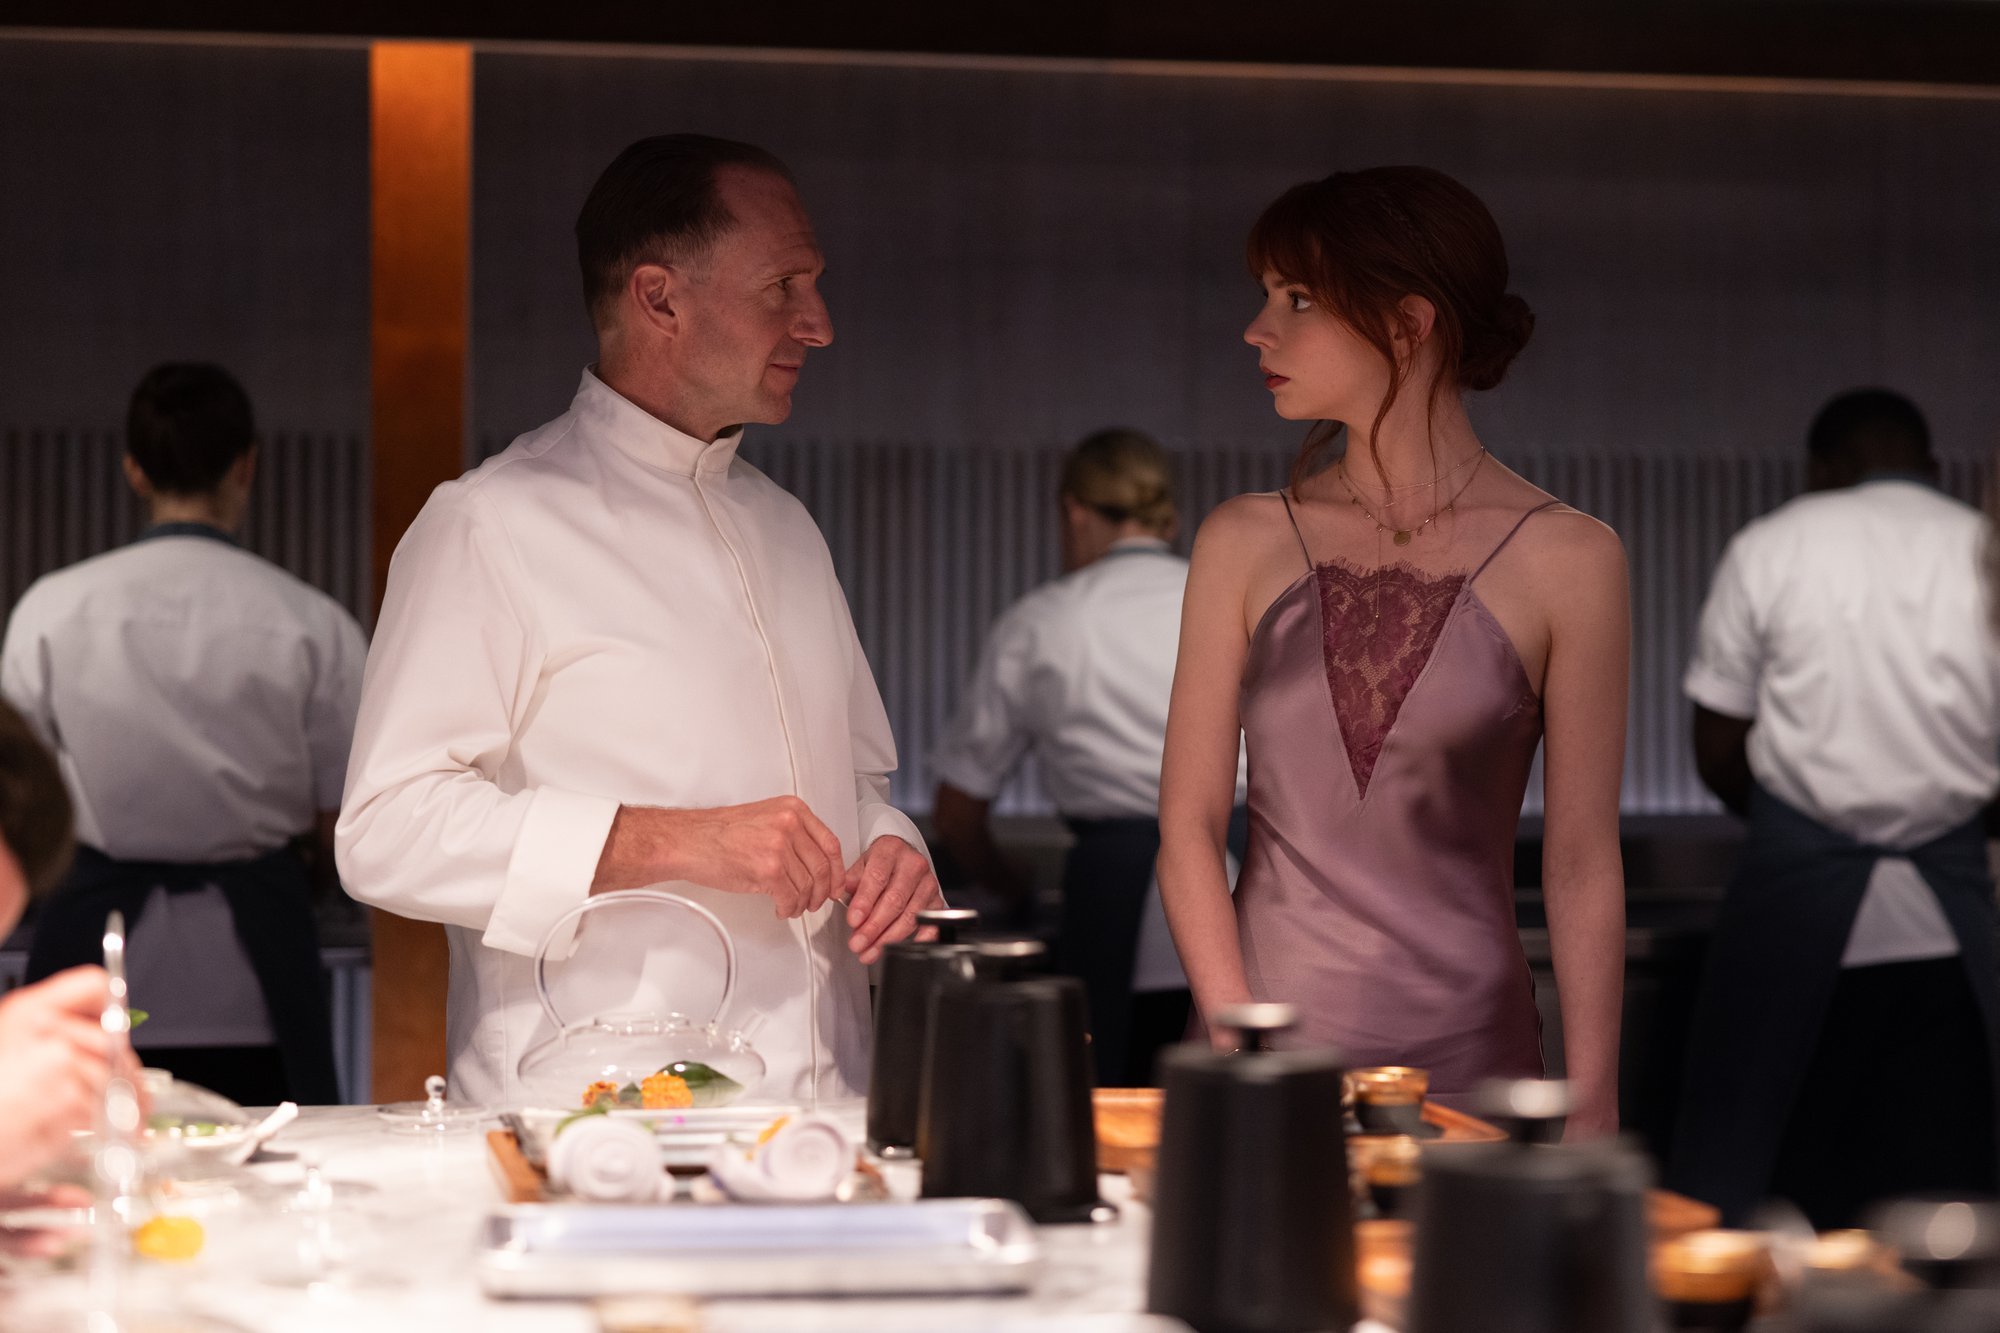 'The Menu' Ralph Fiennes as Chef Slowik and Anya Taylor-Joy as Margot staring at one another in front of a kitchen countertop. Cooks in the background cooking.